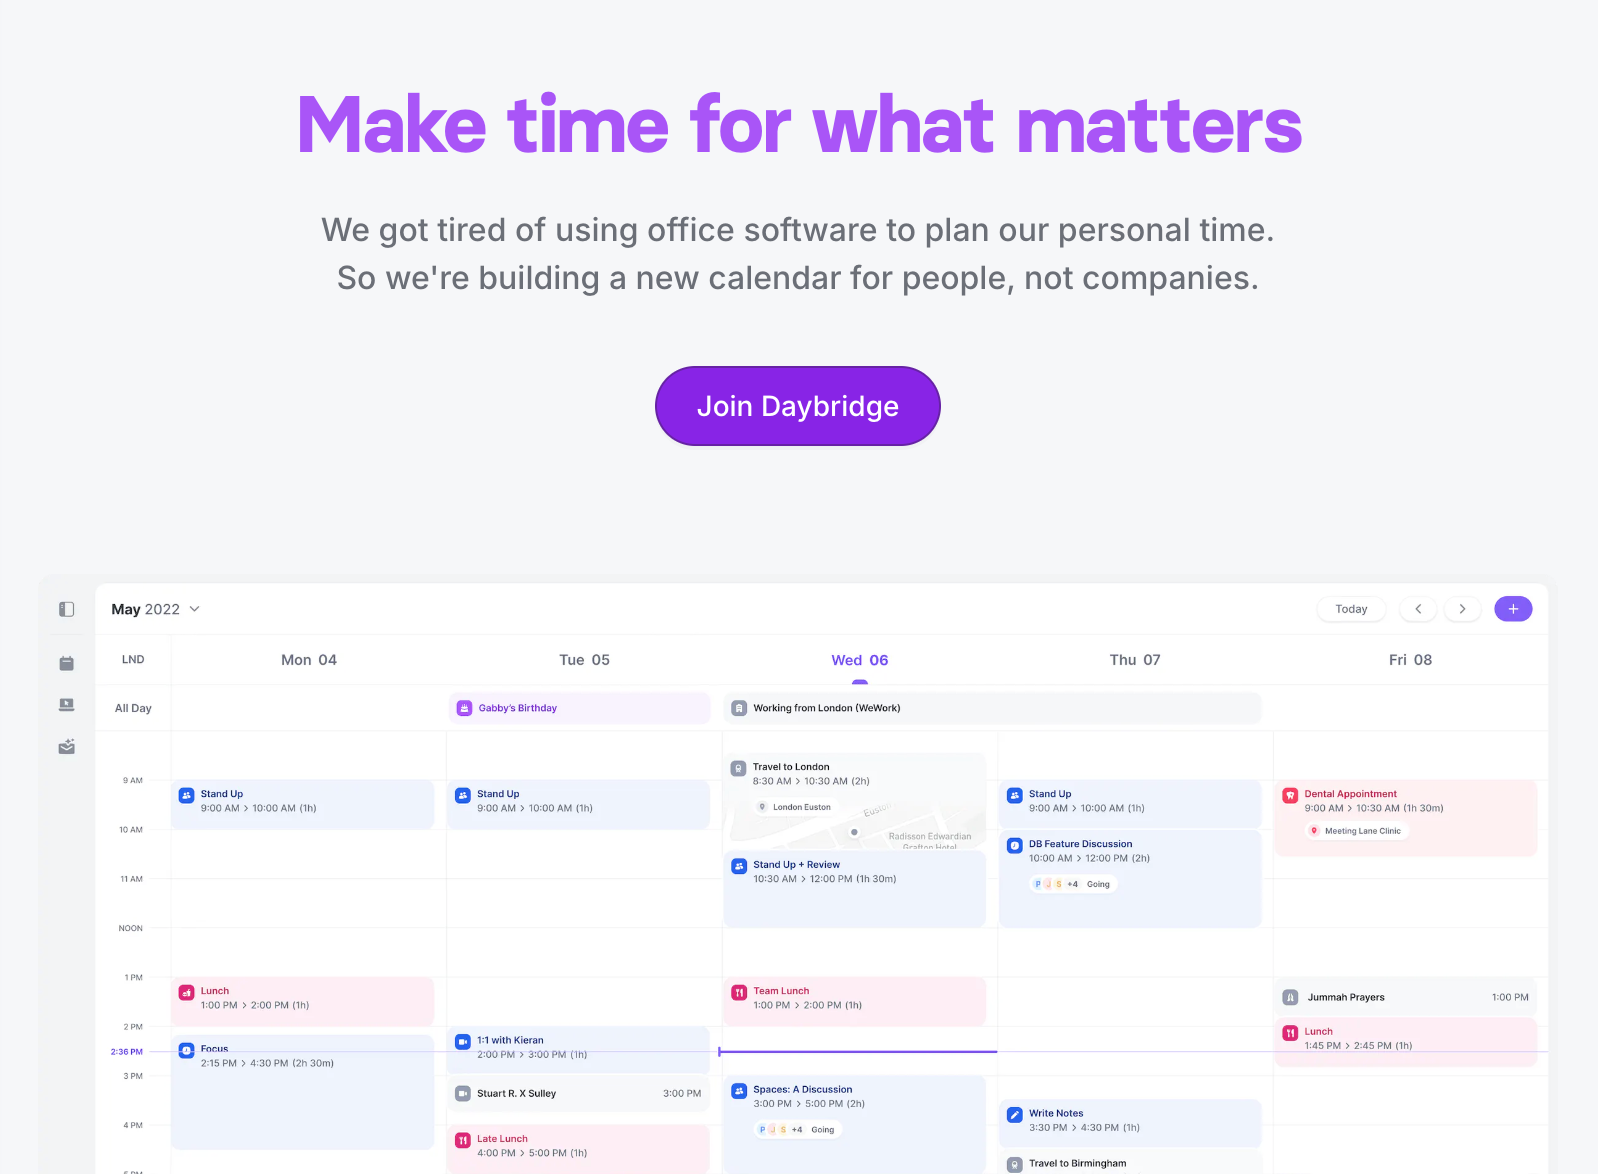 Daybridge 웹사이트 스크린샷: Make time for what matters - We got tired of using office software to plan our personal time. So we're building a new calendar for people, not companies. Join Daybridge 버튼